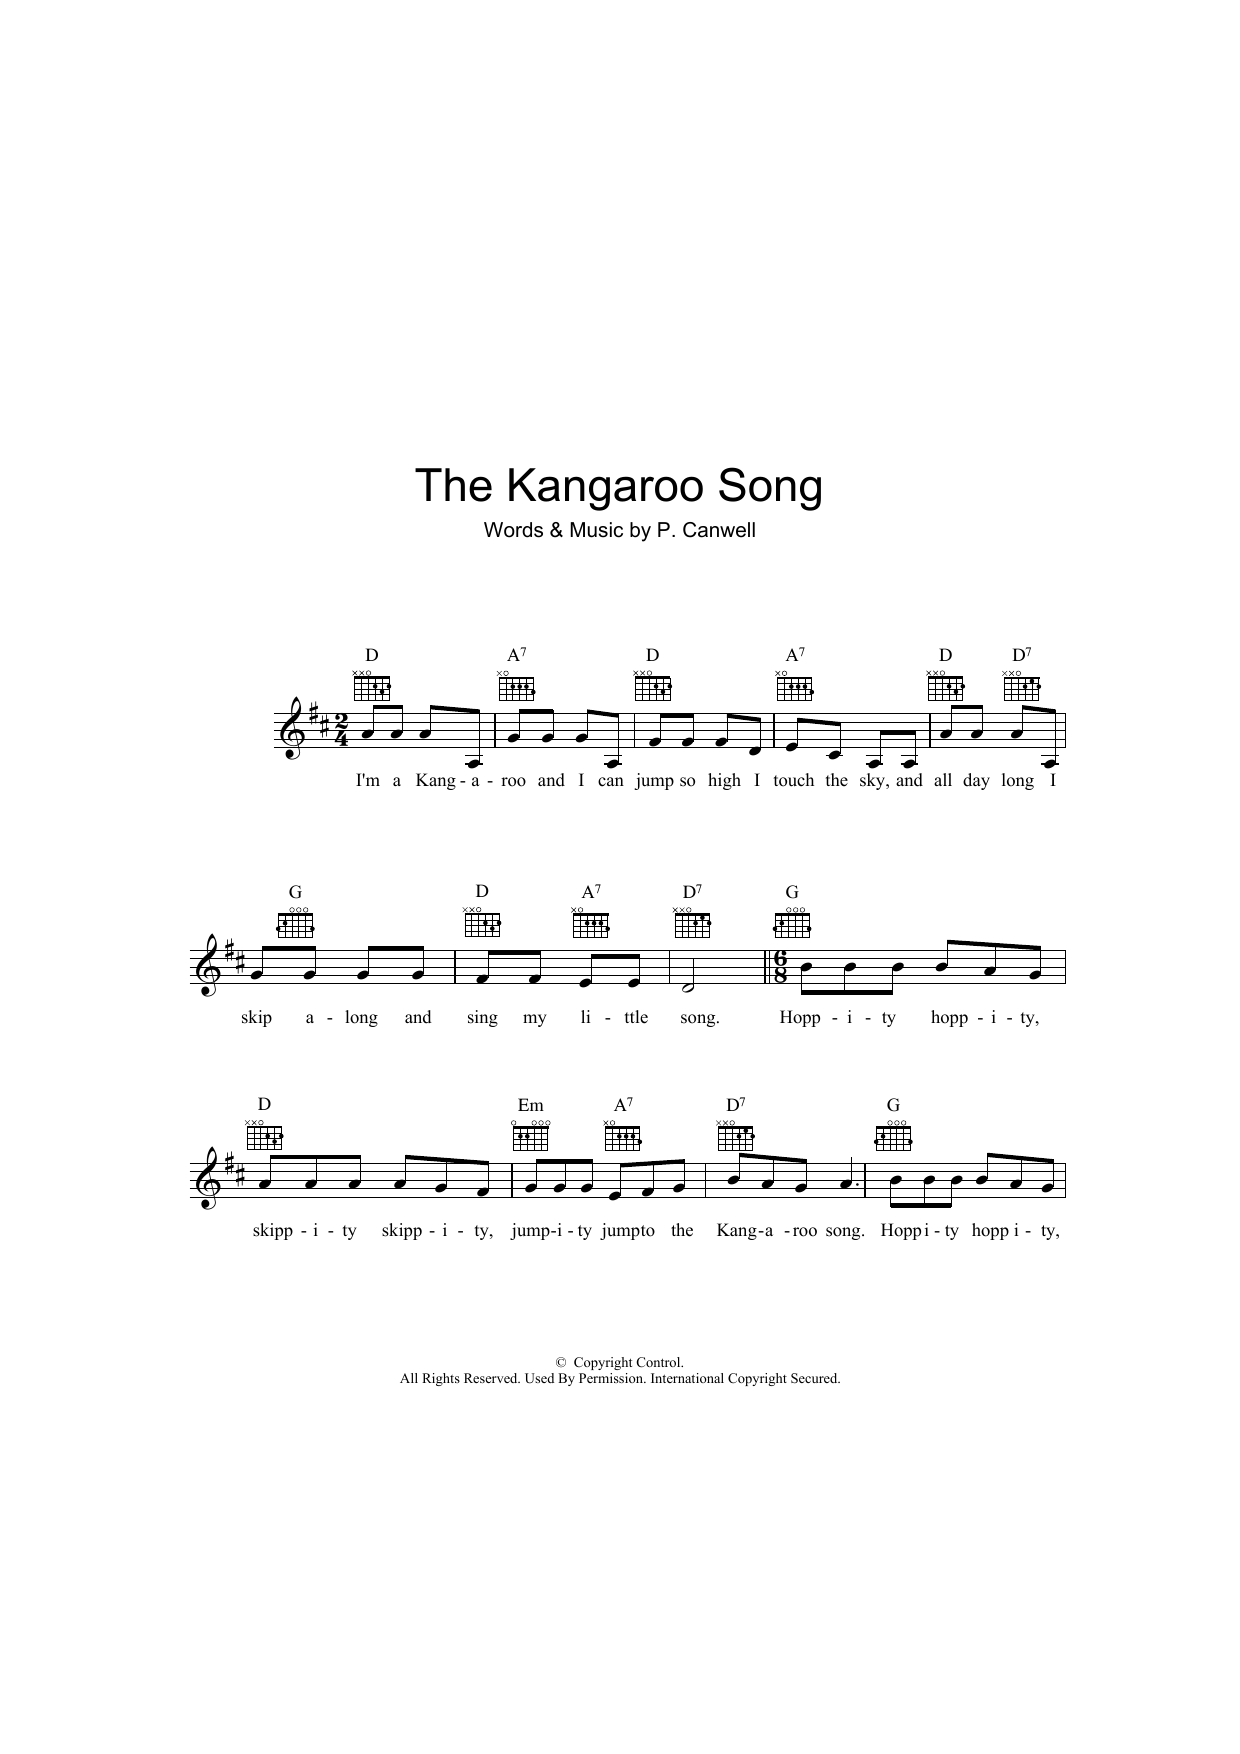 Download Peter Canwell The Kangaroo Song Sheet Music